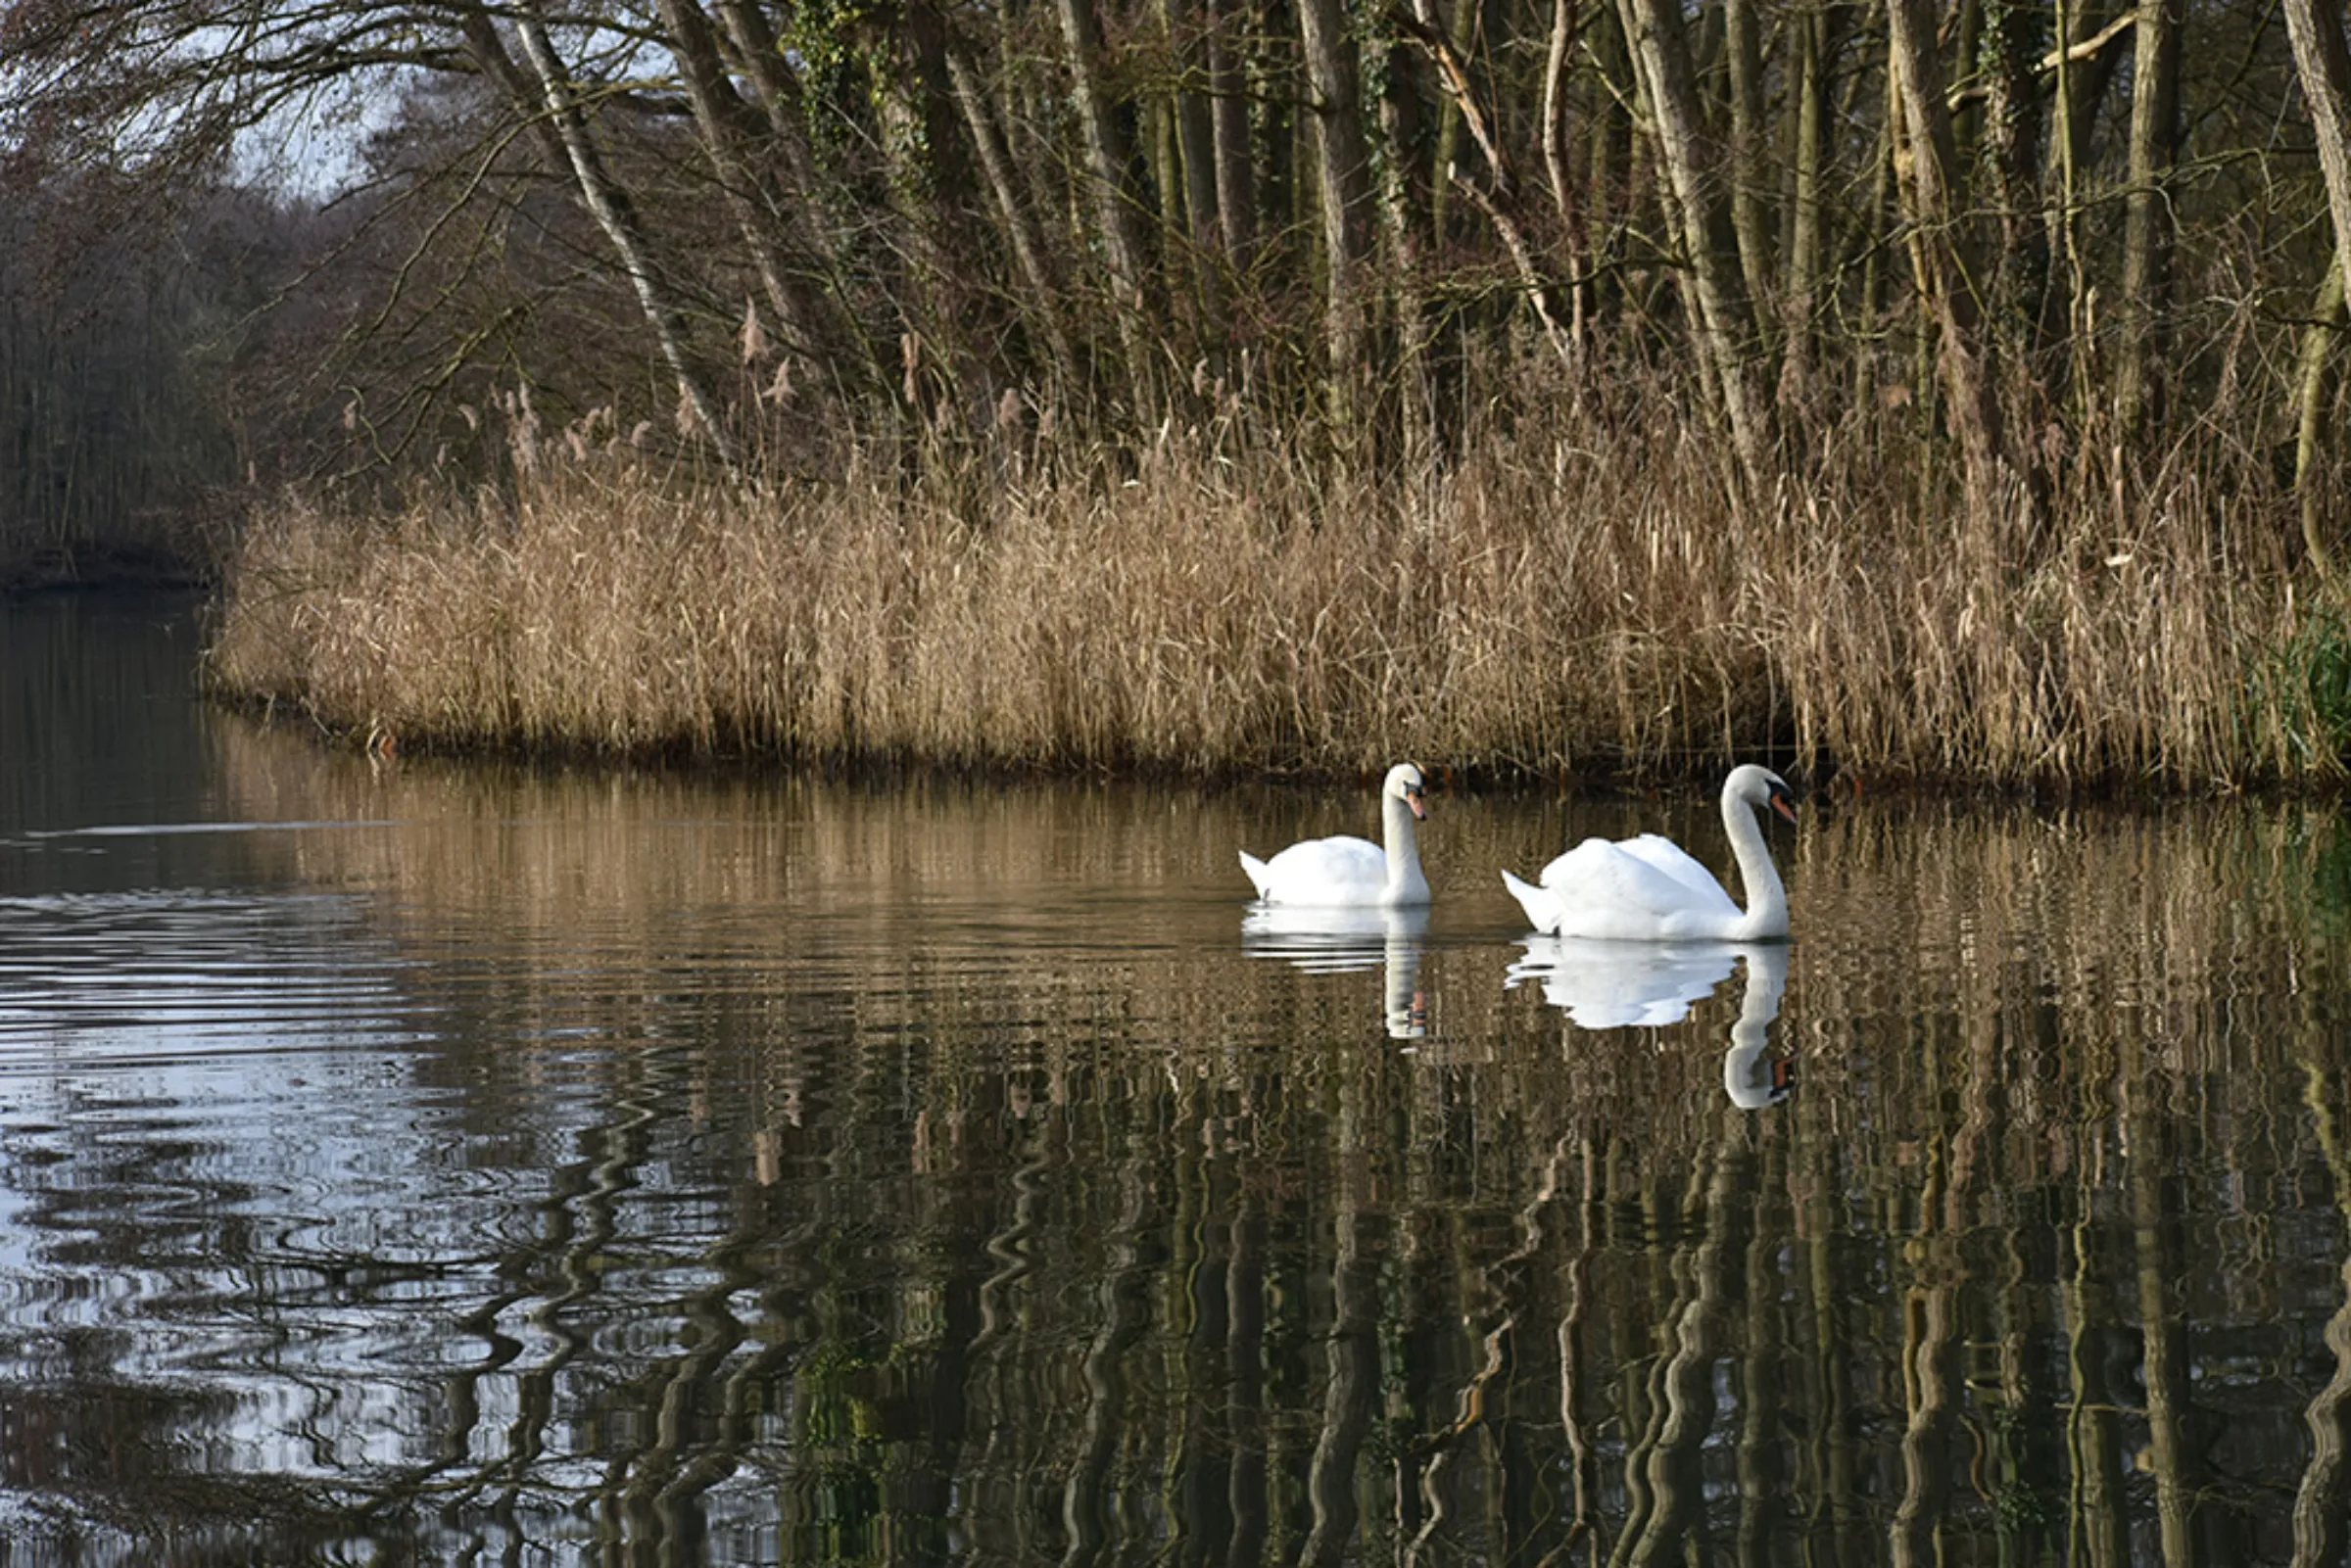 Swans on the River Bure near Wroxham in the Broads, east England, February 10, 2023. Avian flu killed thousands of birds, including swans, in the last year, compounding biodiversity loss because of habitat damage and climate change. Thomson Reuters Foundation/Rachel Parsons